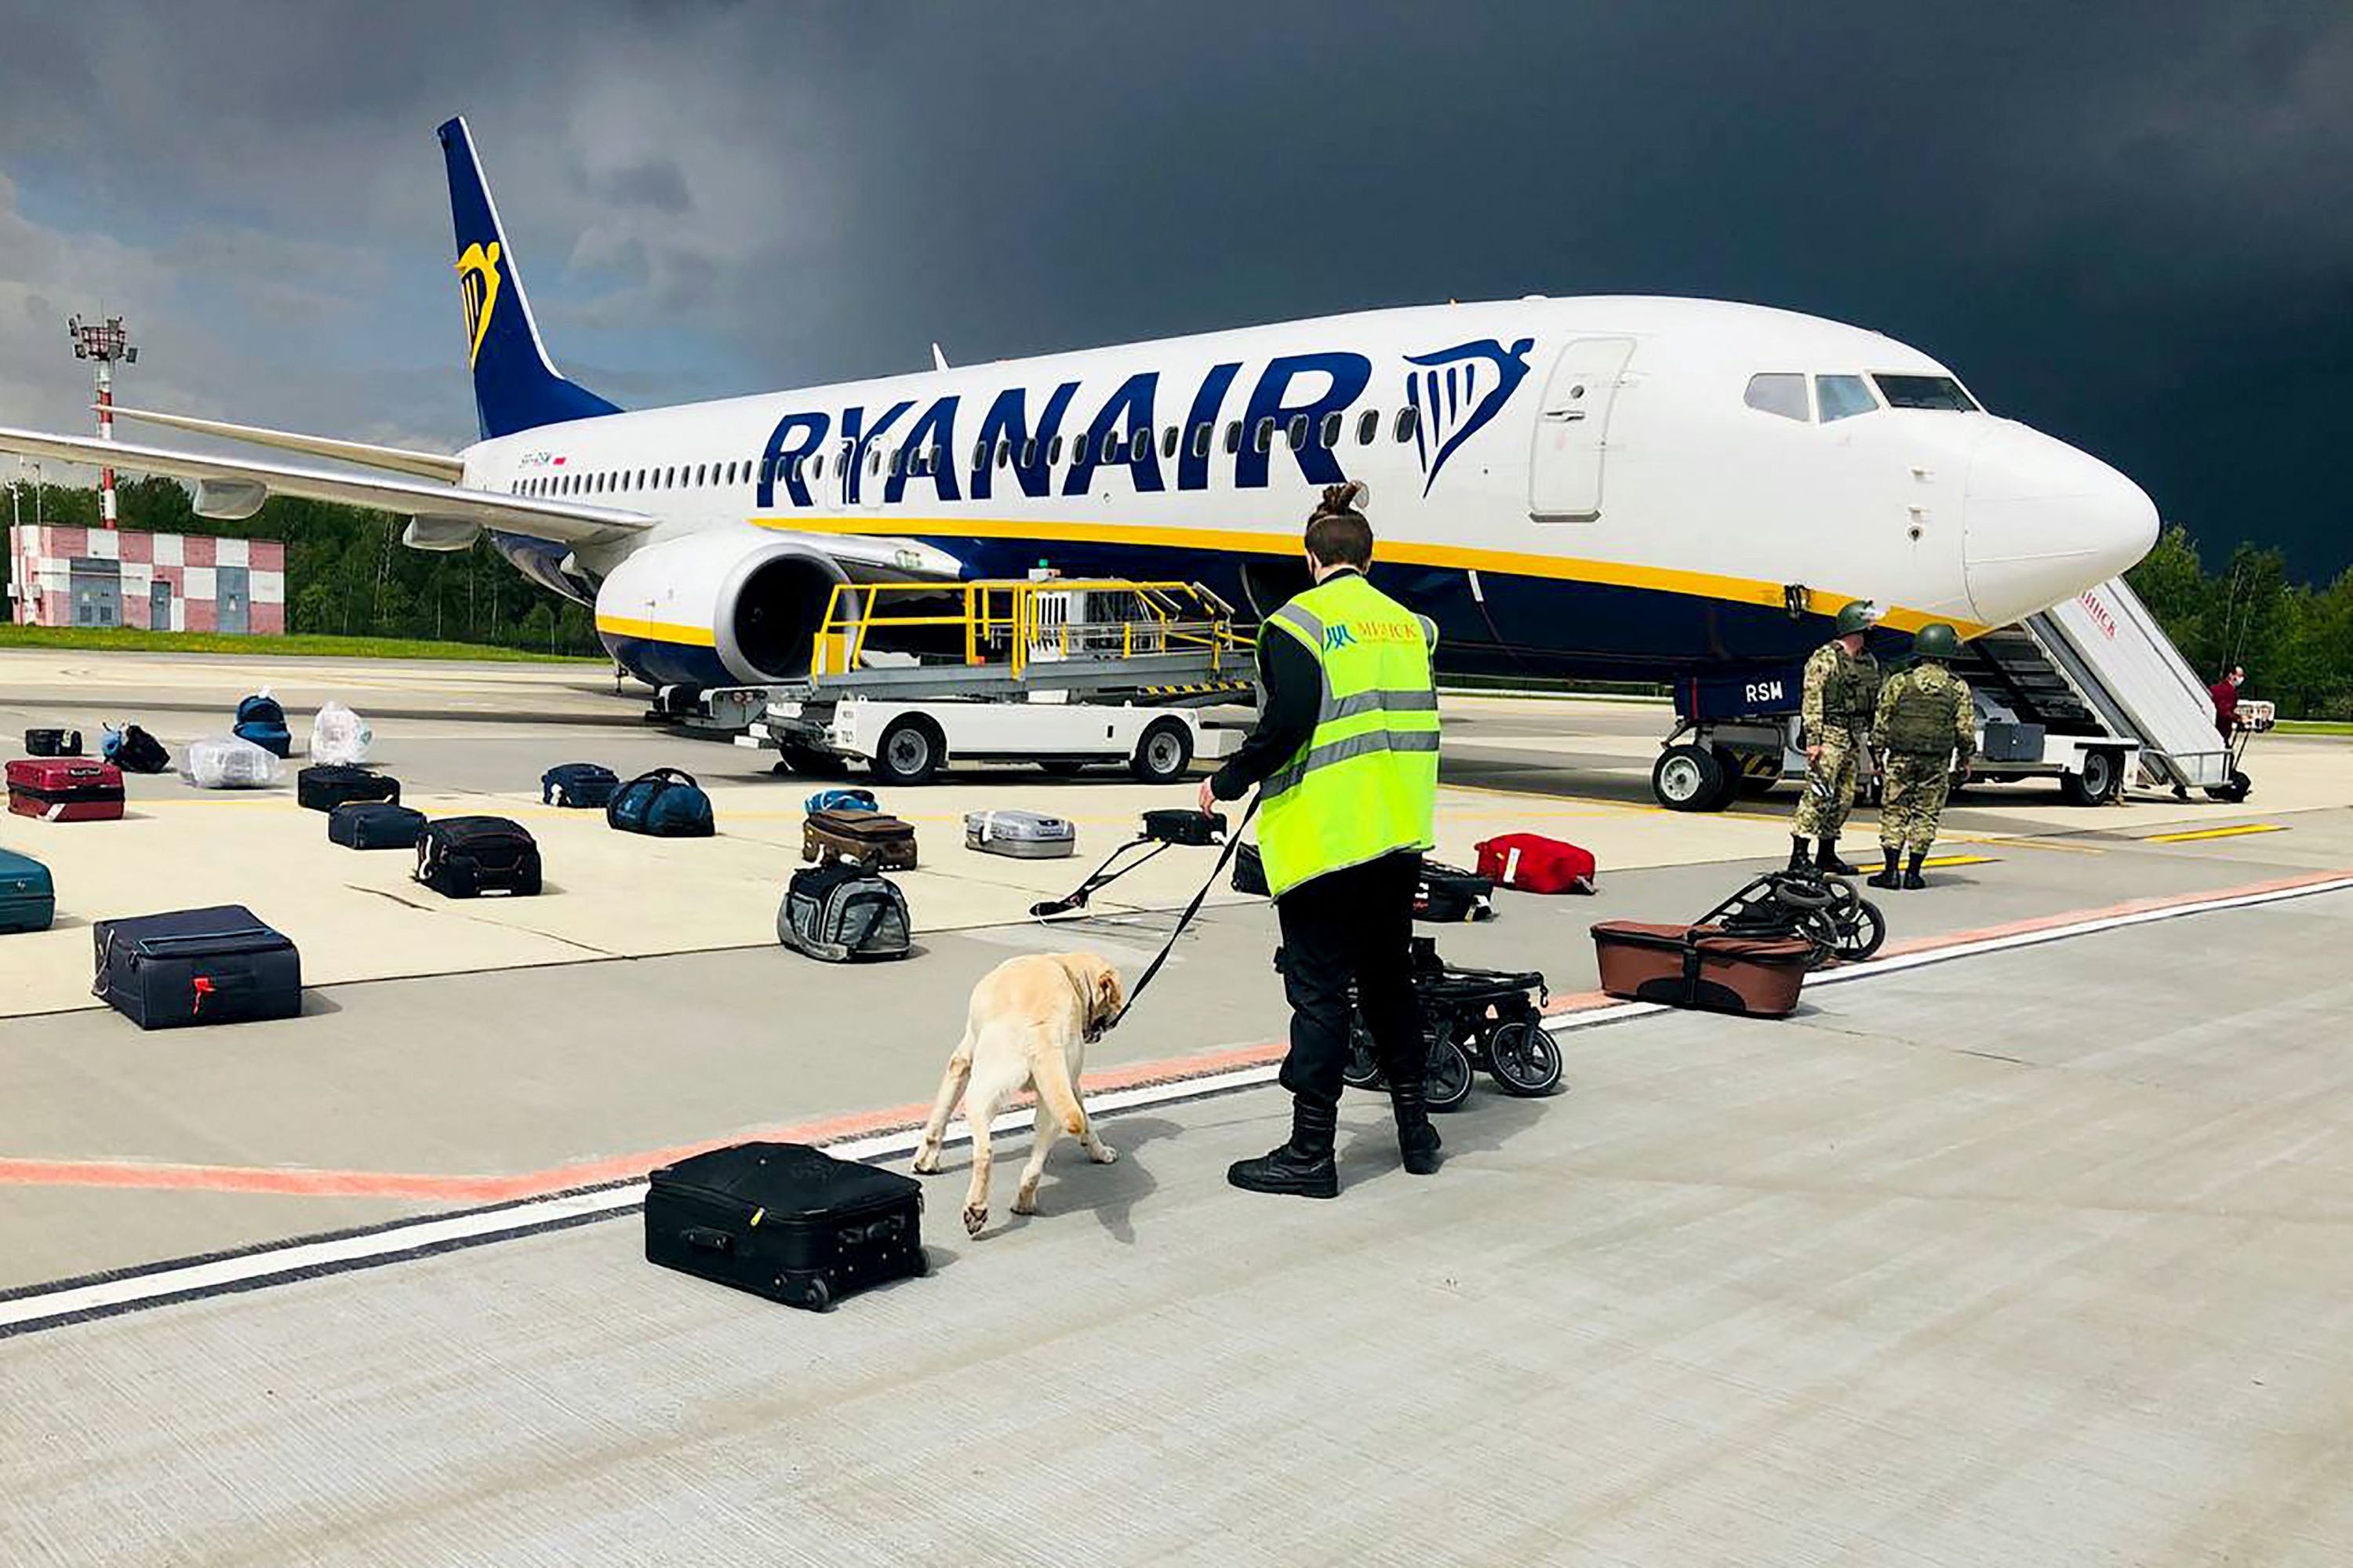 A Belarusian dog handler checks luggage from the plane that was forced to land in Minsk